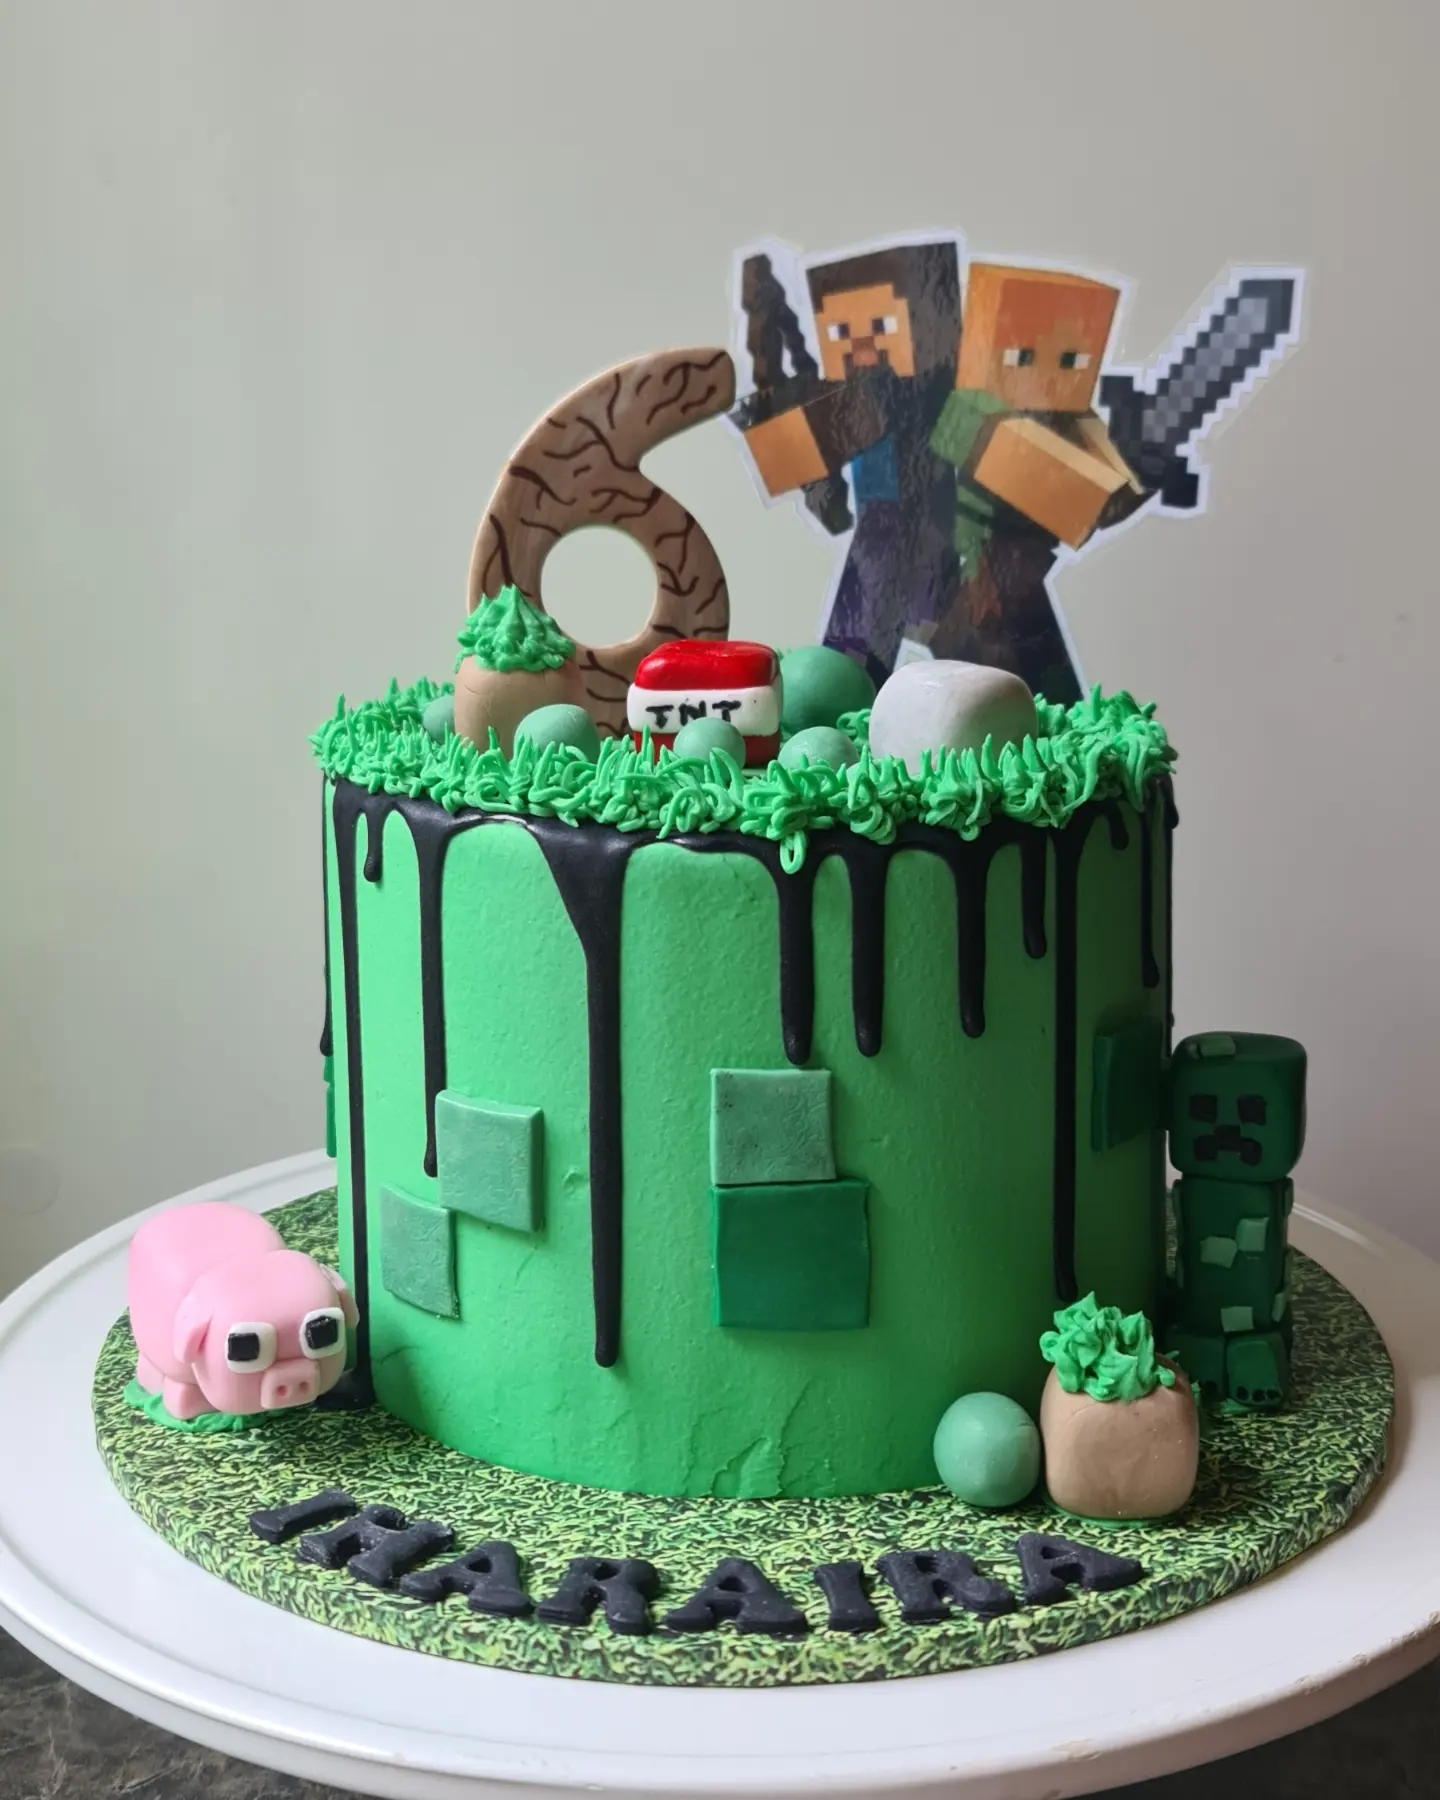 6 inch themed cake